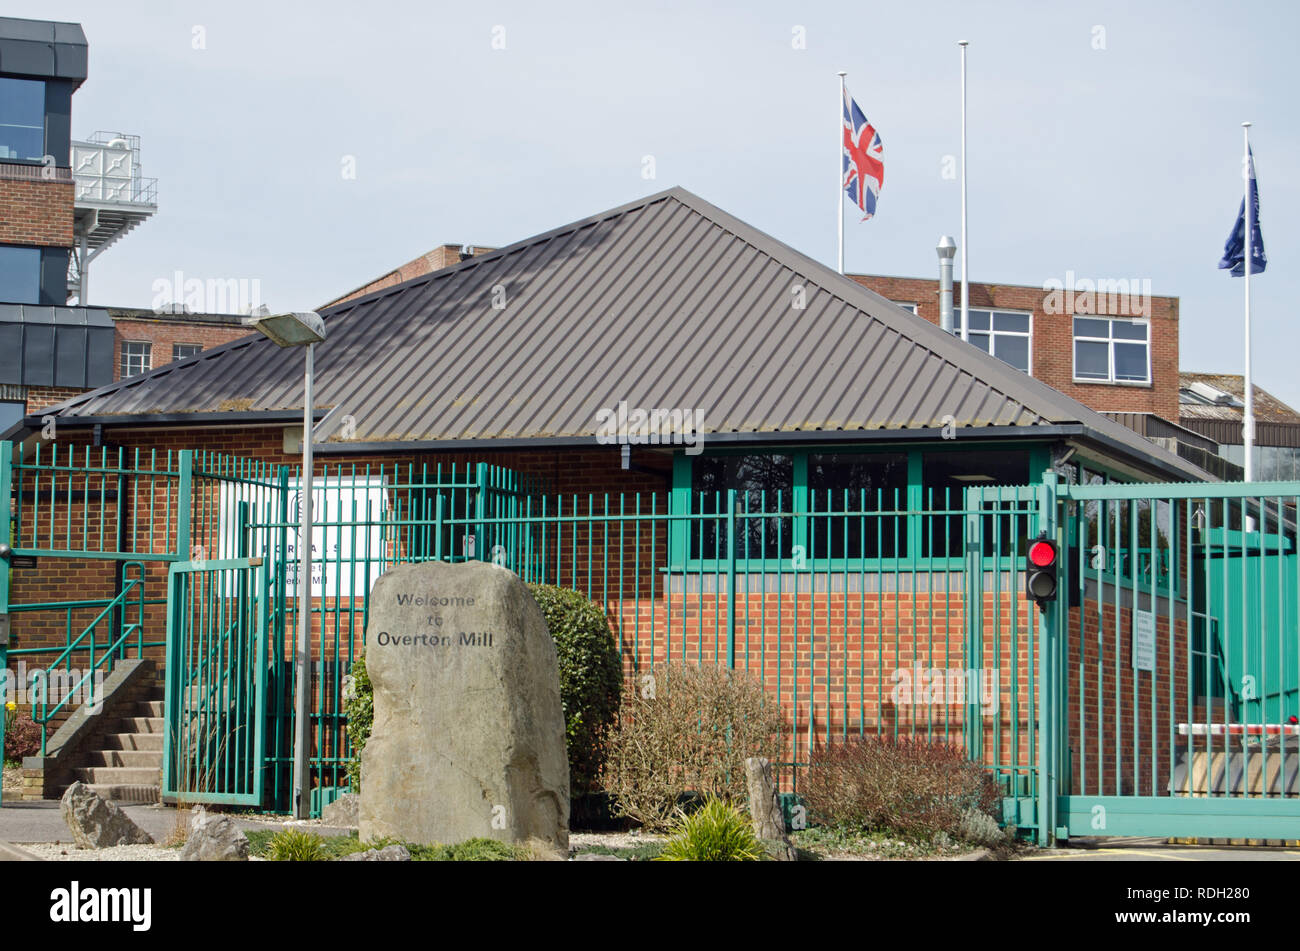 OVERTON, HAMPSHIRE, UK - APRIL 6, 2018:  Security entrance to the Portals bank note printing works at Overton Mill in Hampshire.  First used by the Ba Stock Photo